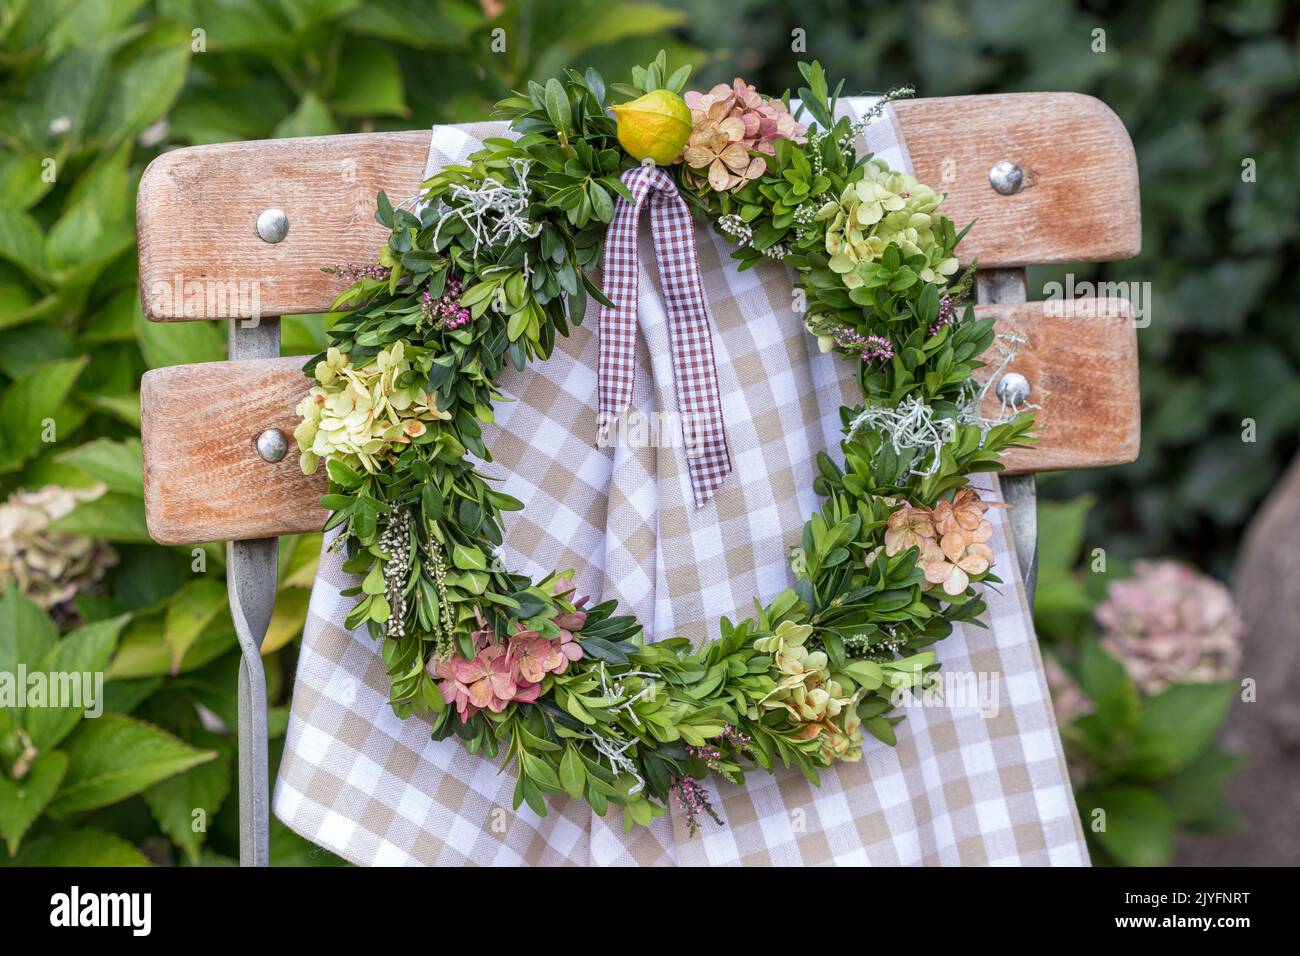 wreath of hydrangea flowers and box tree branches hanging on garten chair Stock Photo